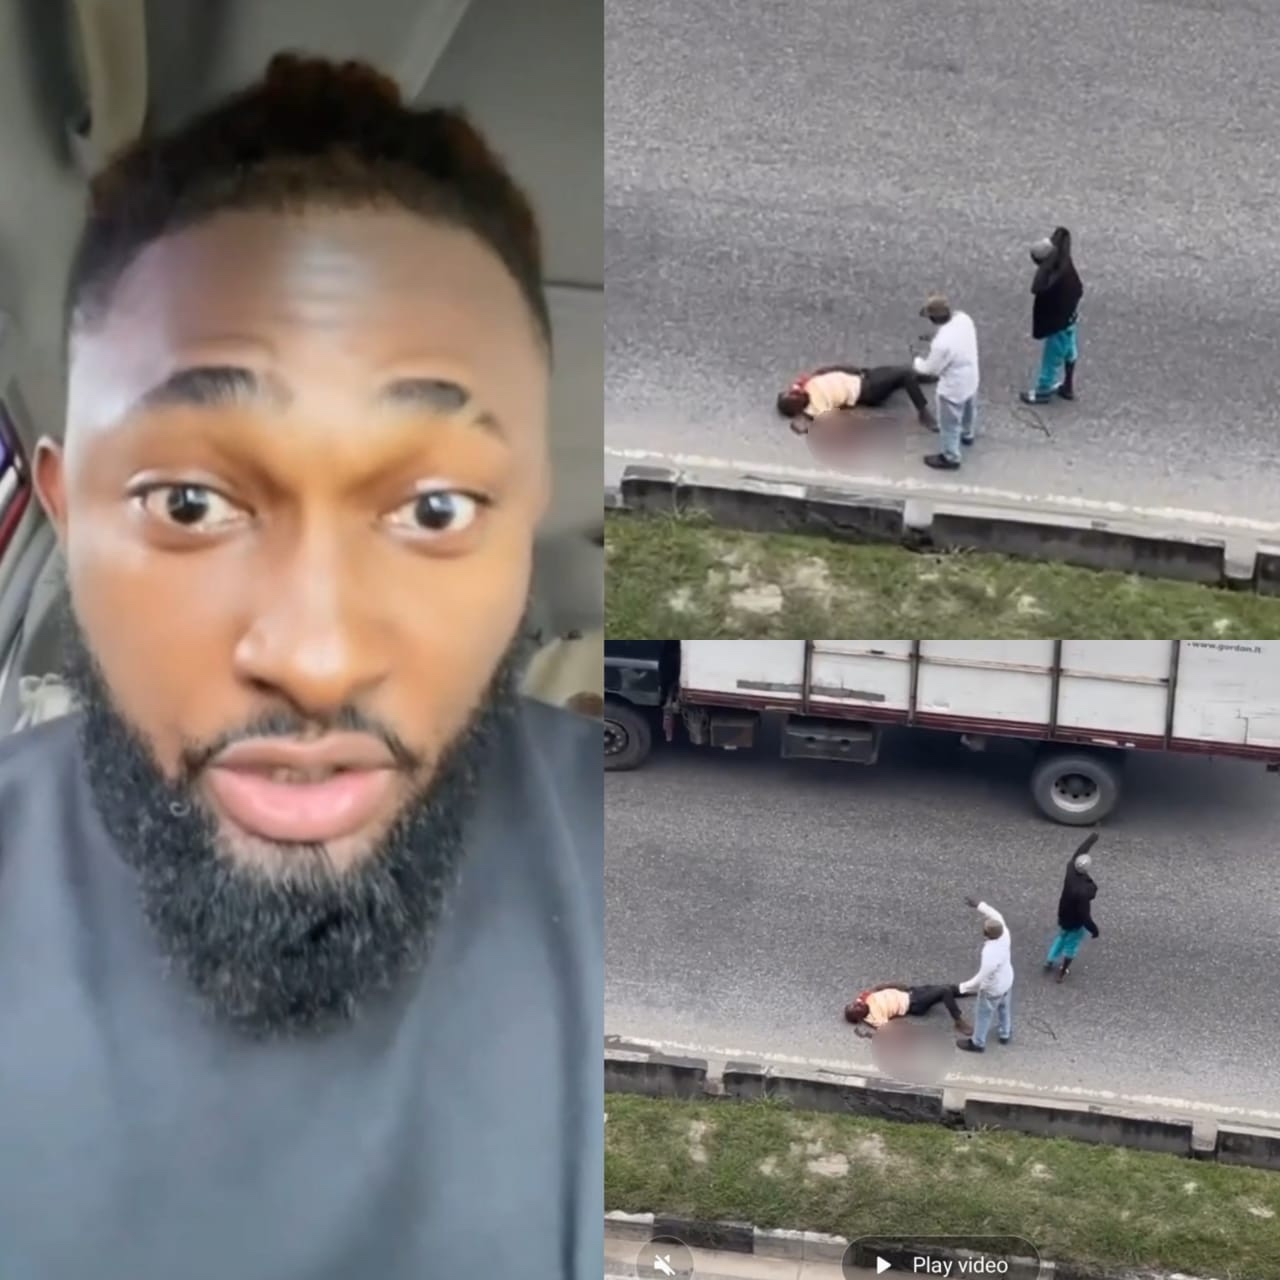 Actor Uti Nwachukwu calls out Lagos state govt after emergency numbers fail to help in his efforts to rescue hit and run victim